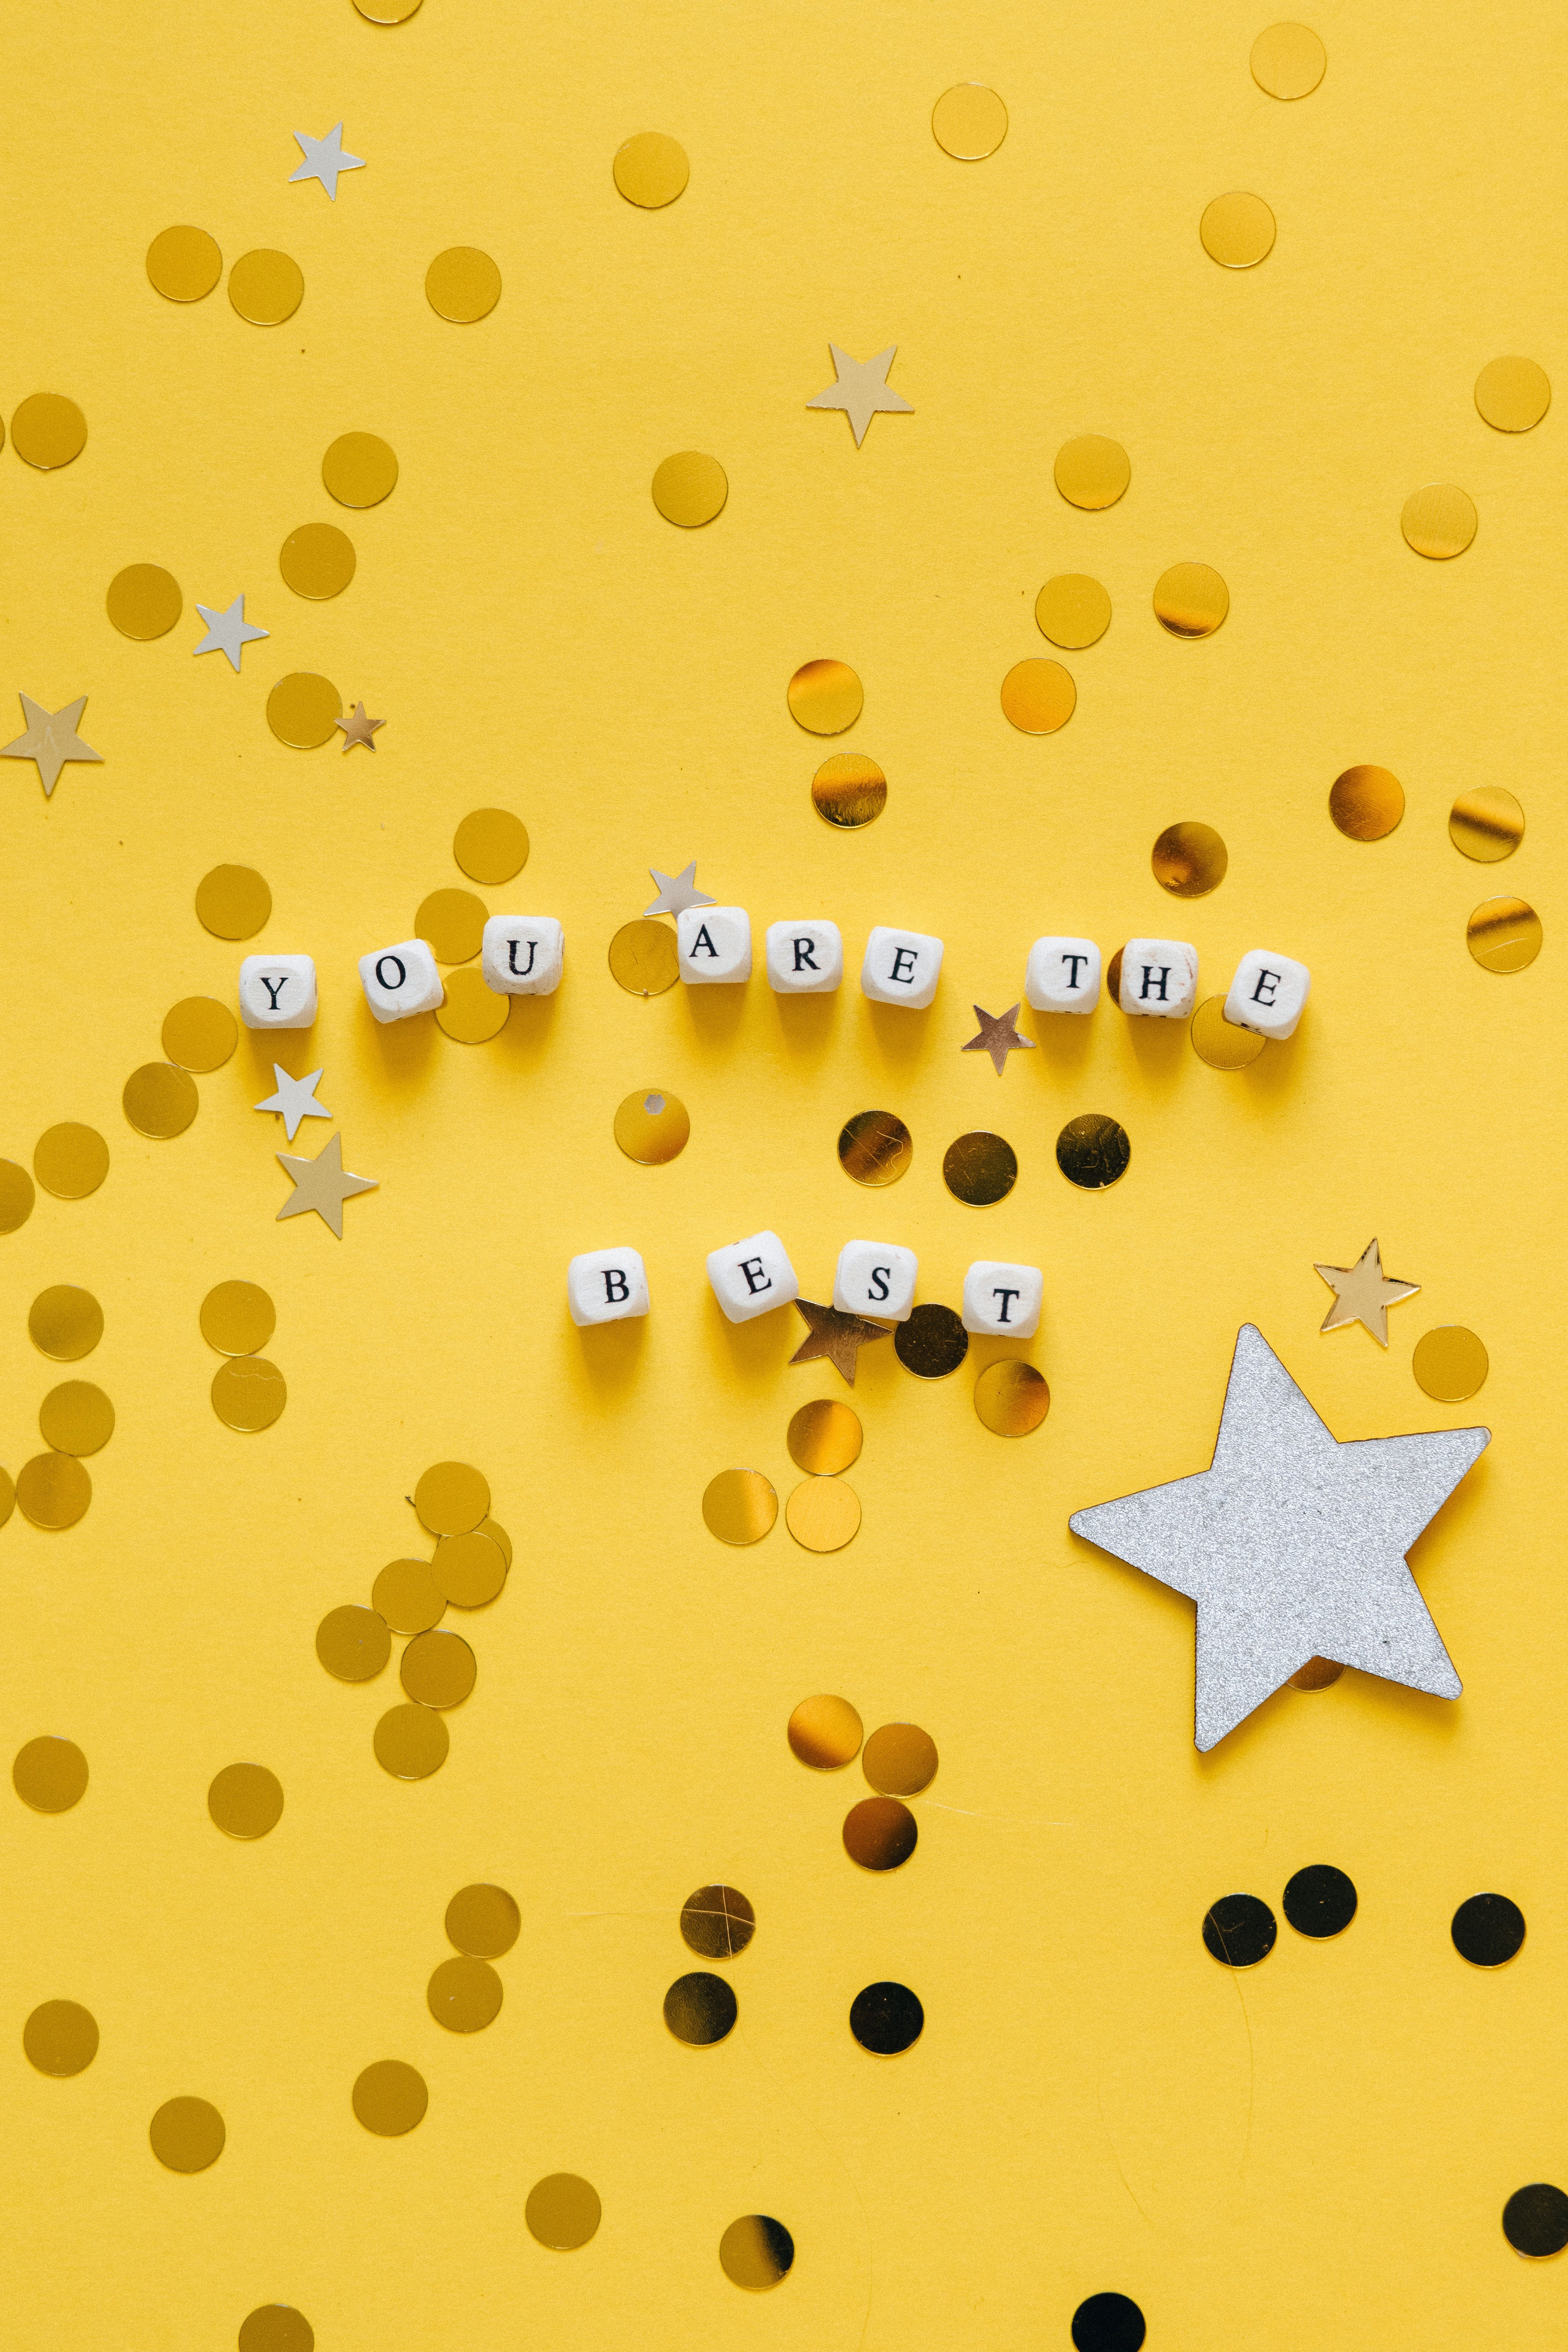 A yellow background with white letters and stars - Emoji